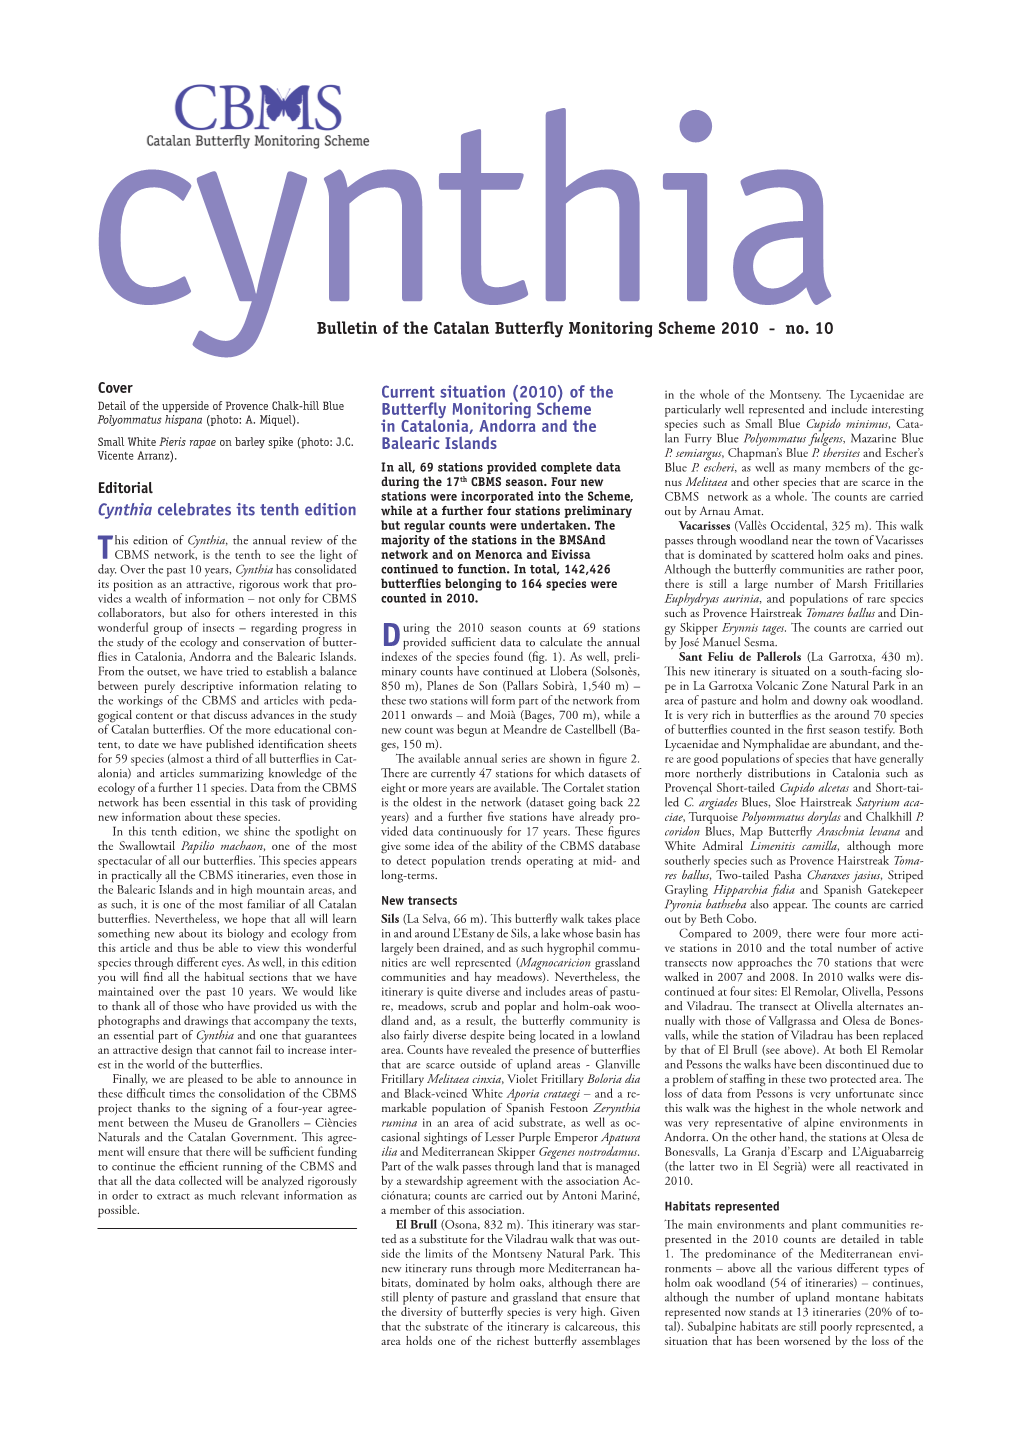 Cynthia Celebrates Its Tenth Edition Current Situation (2010) of The